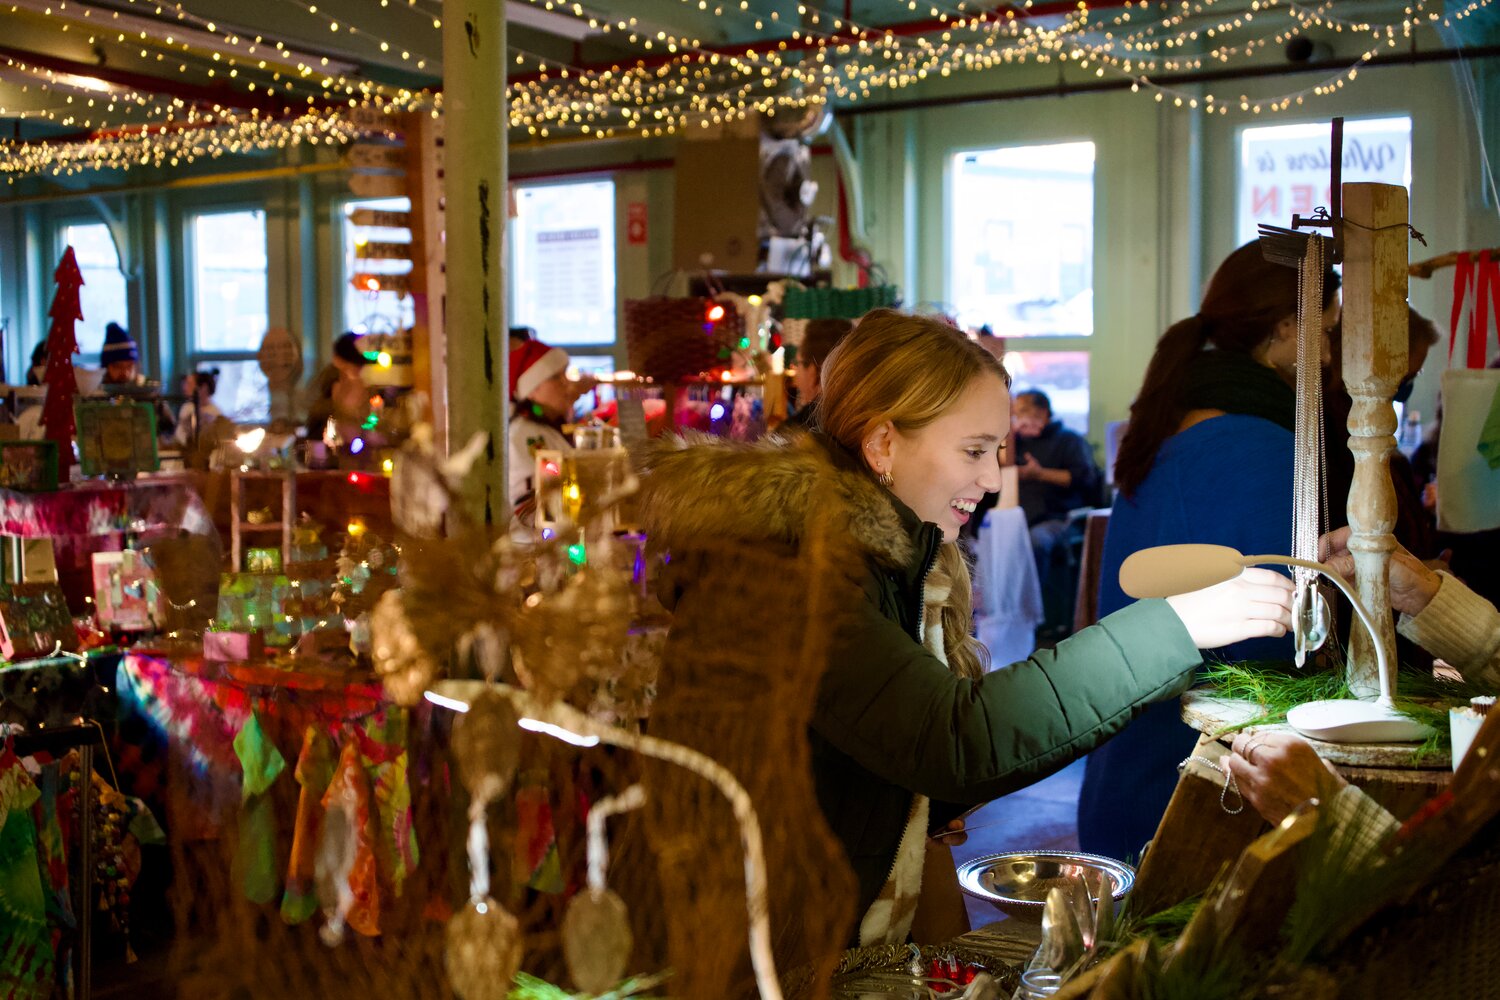 The Field of Artisans pops up at Big John Leyden's Tree Farm for a festive opening weekend